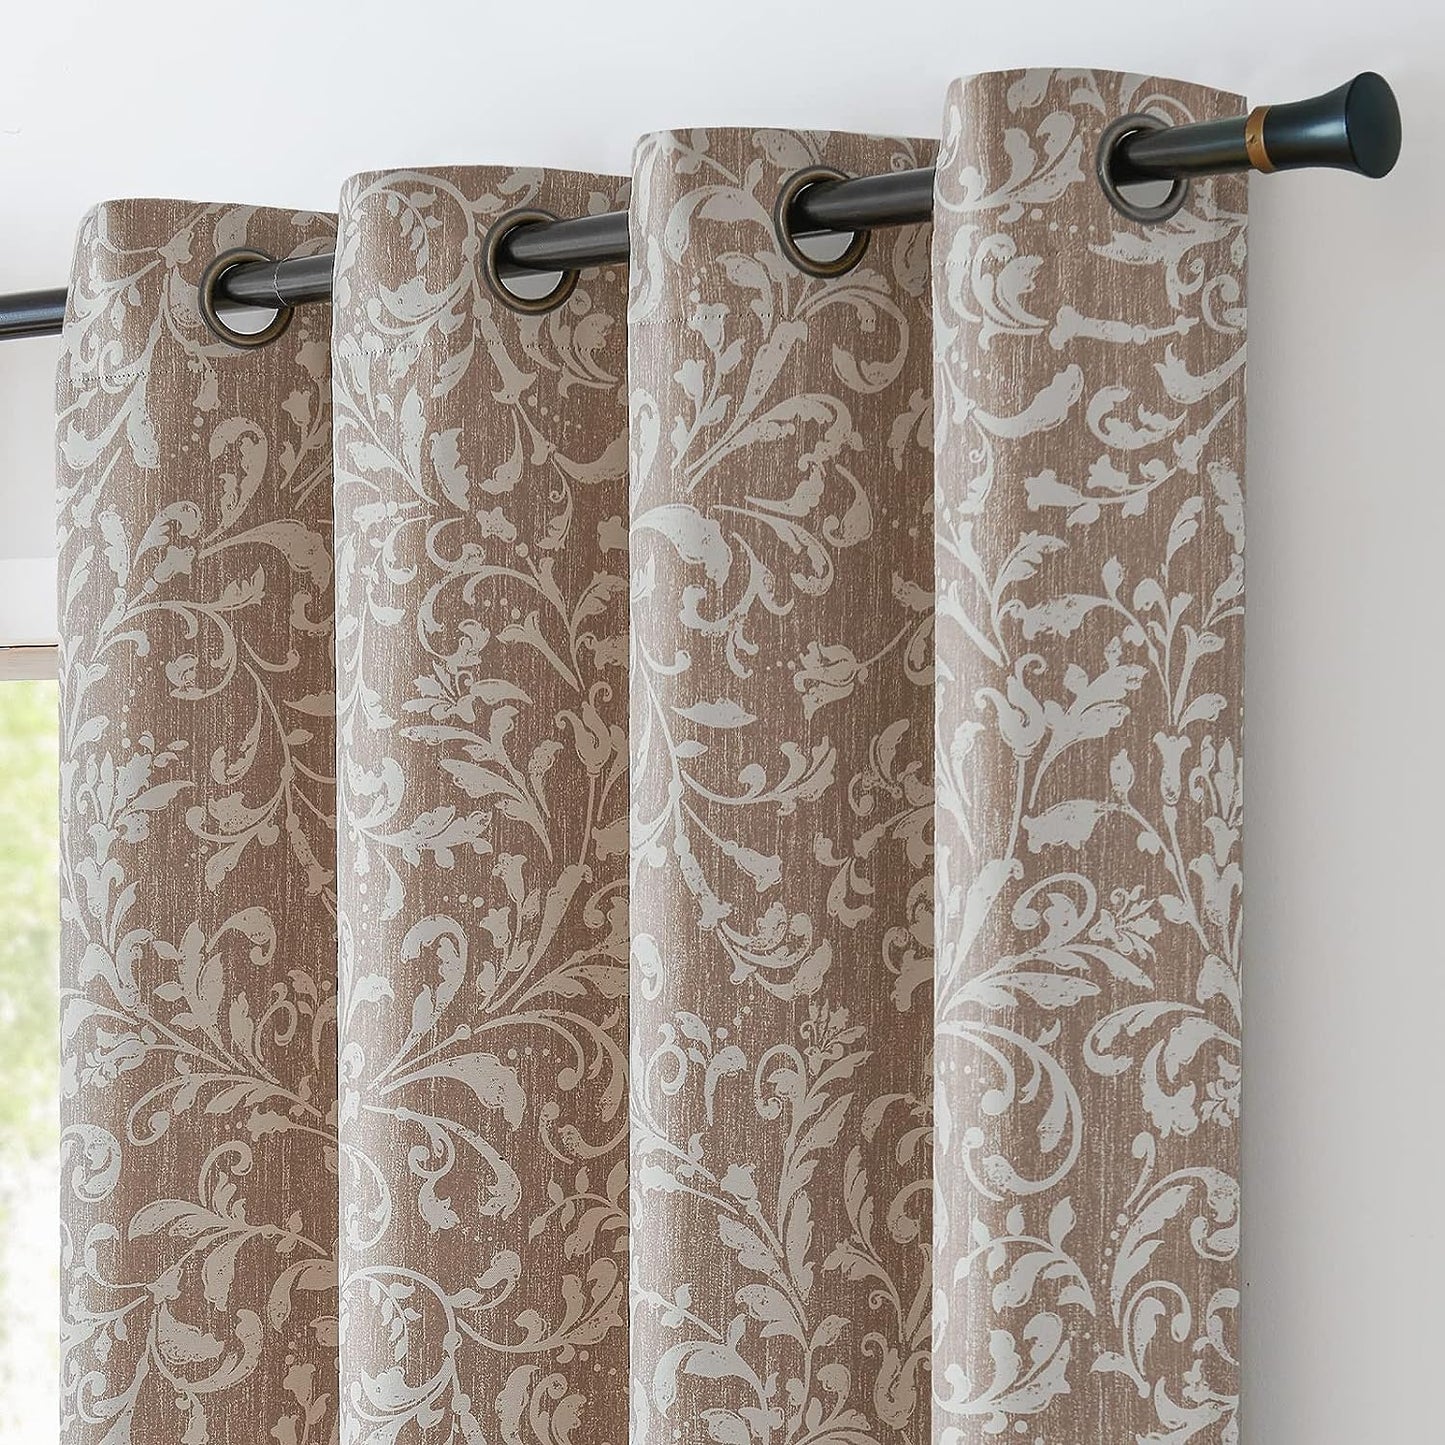 Jinchan 80% Blackout Curtains for Living Room, Farmhouse Drapes with Scroll Floral Patterned for Bedroom, Grommet Top Thermal Insulated Curtains, Vintage Country Curtain 84 Inch Length 2 Panels Blue  CKNY HOME FASHION B | Floral Taupe 80 Blackout 108"L 